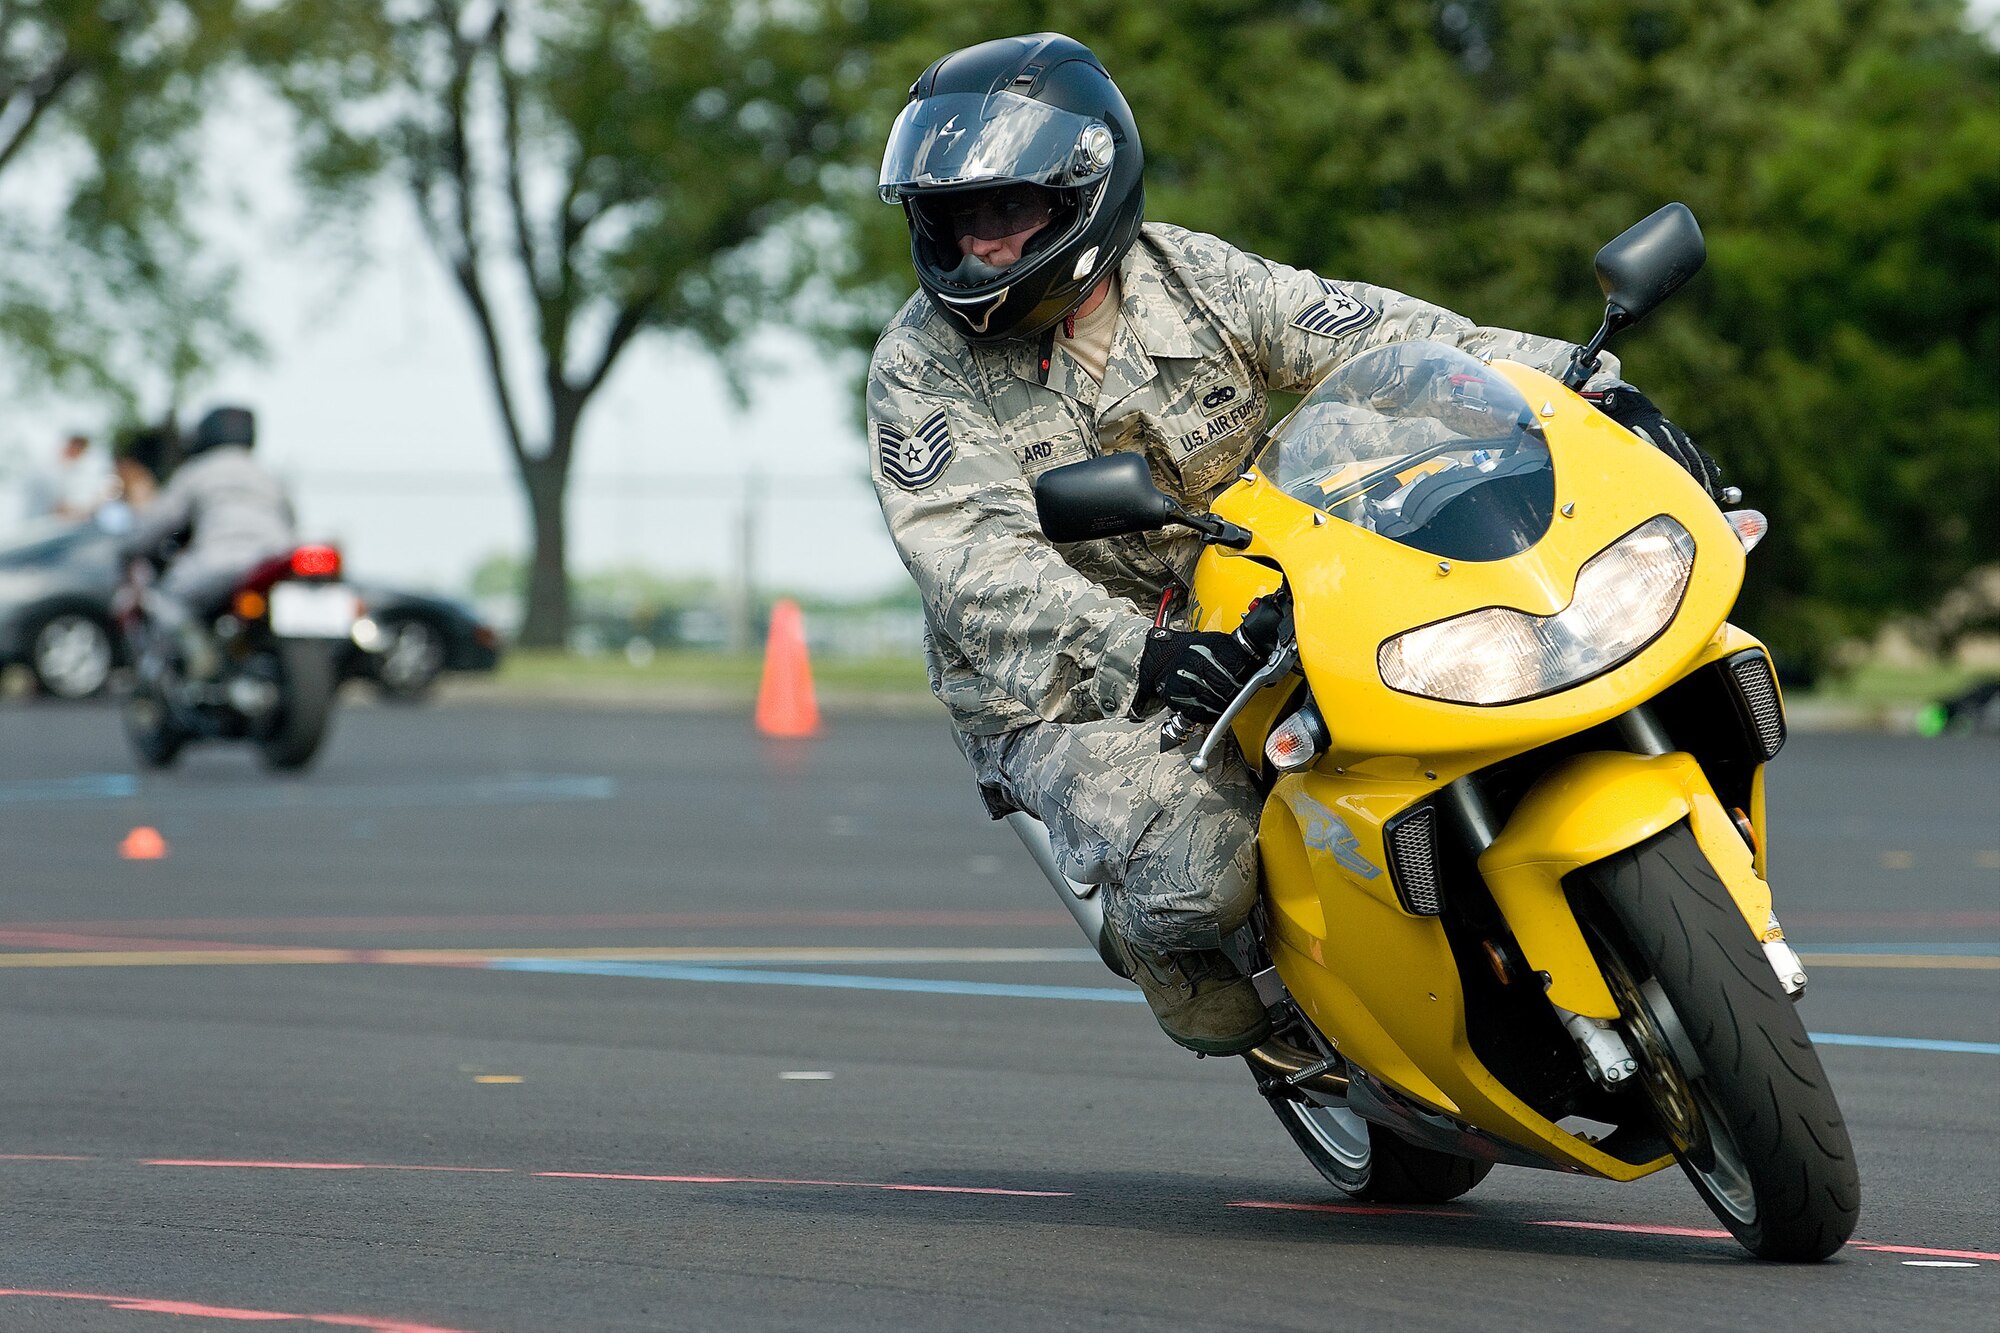 Tech. Sgt. John Willard rides through the Eagle's Nest motorcycle safety course Aug. 21 following a tactical demonstration from a member of the Dover Police Department motorcycle division for a 436th Maintenance Squadron motorcycle safety course. (U.S. Air Force photo/Roland Balik)